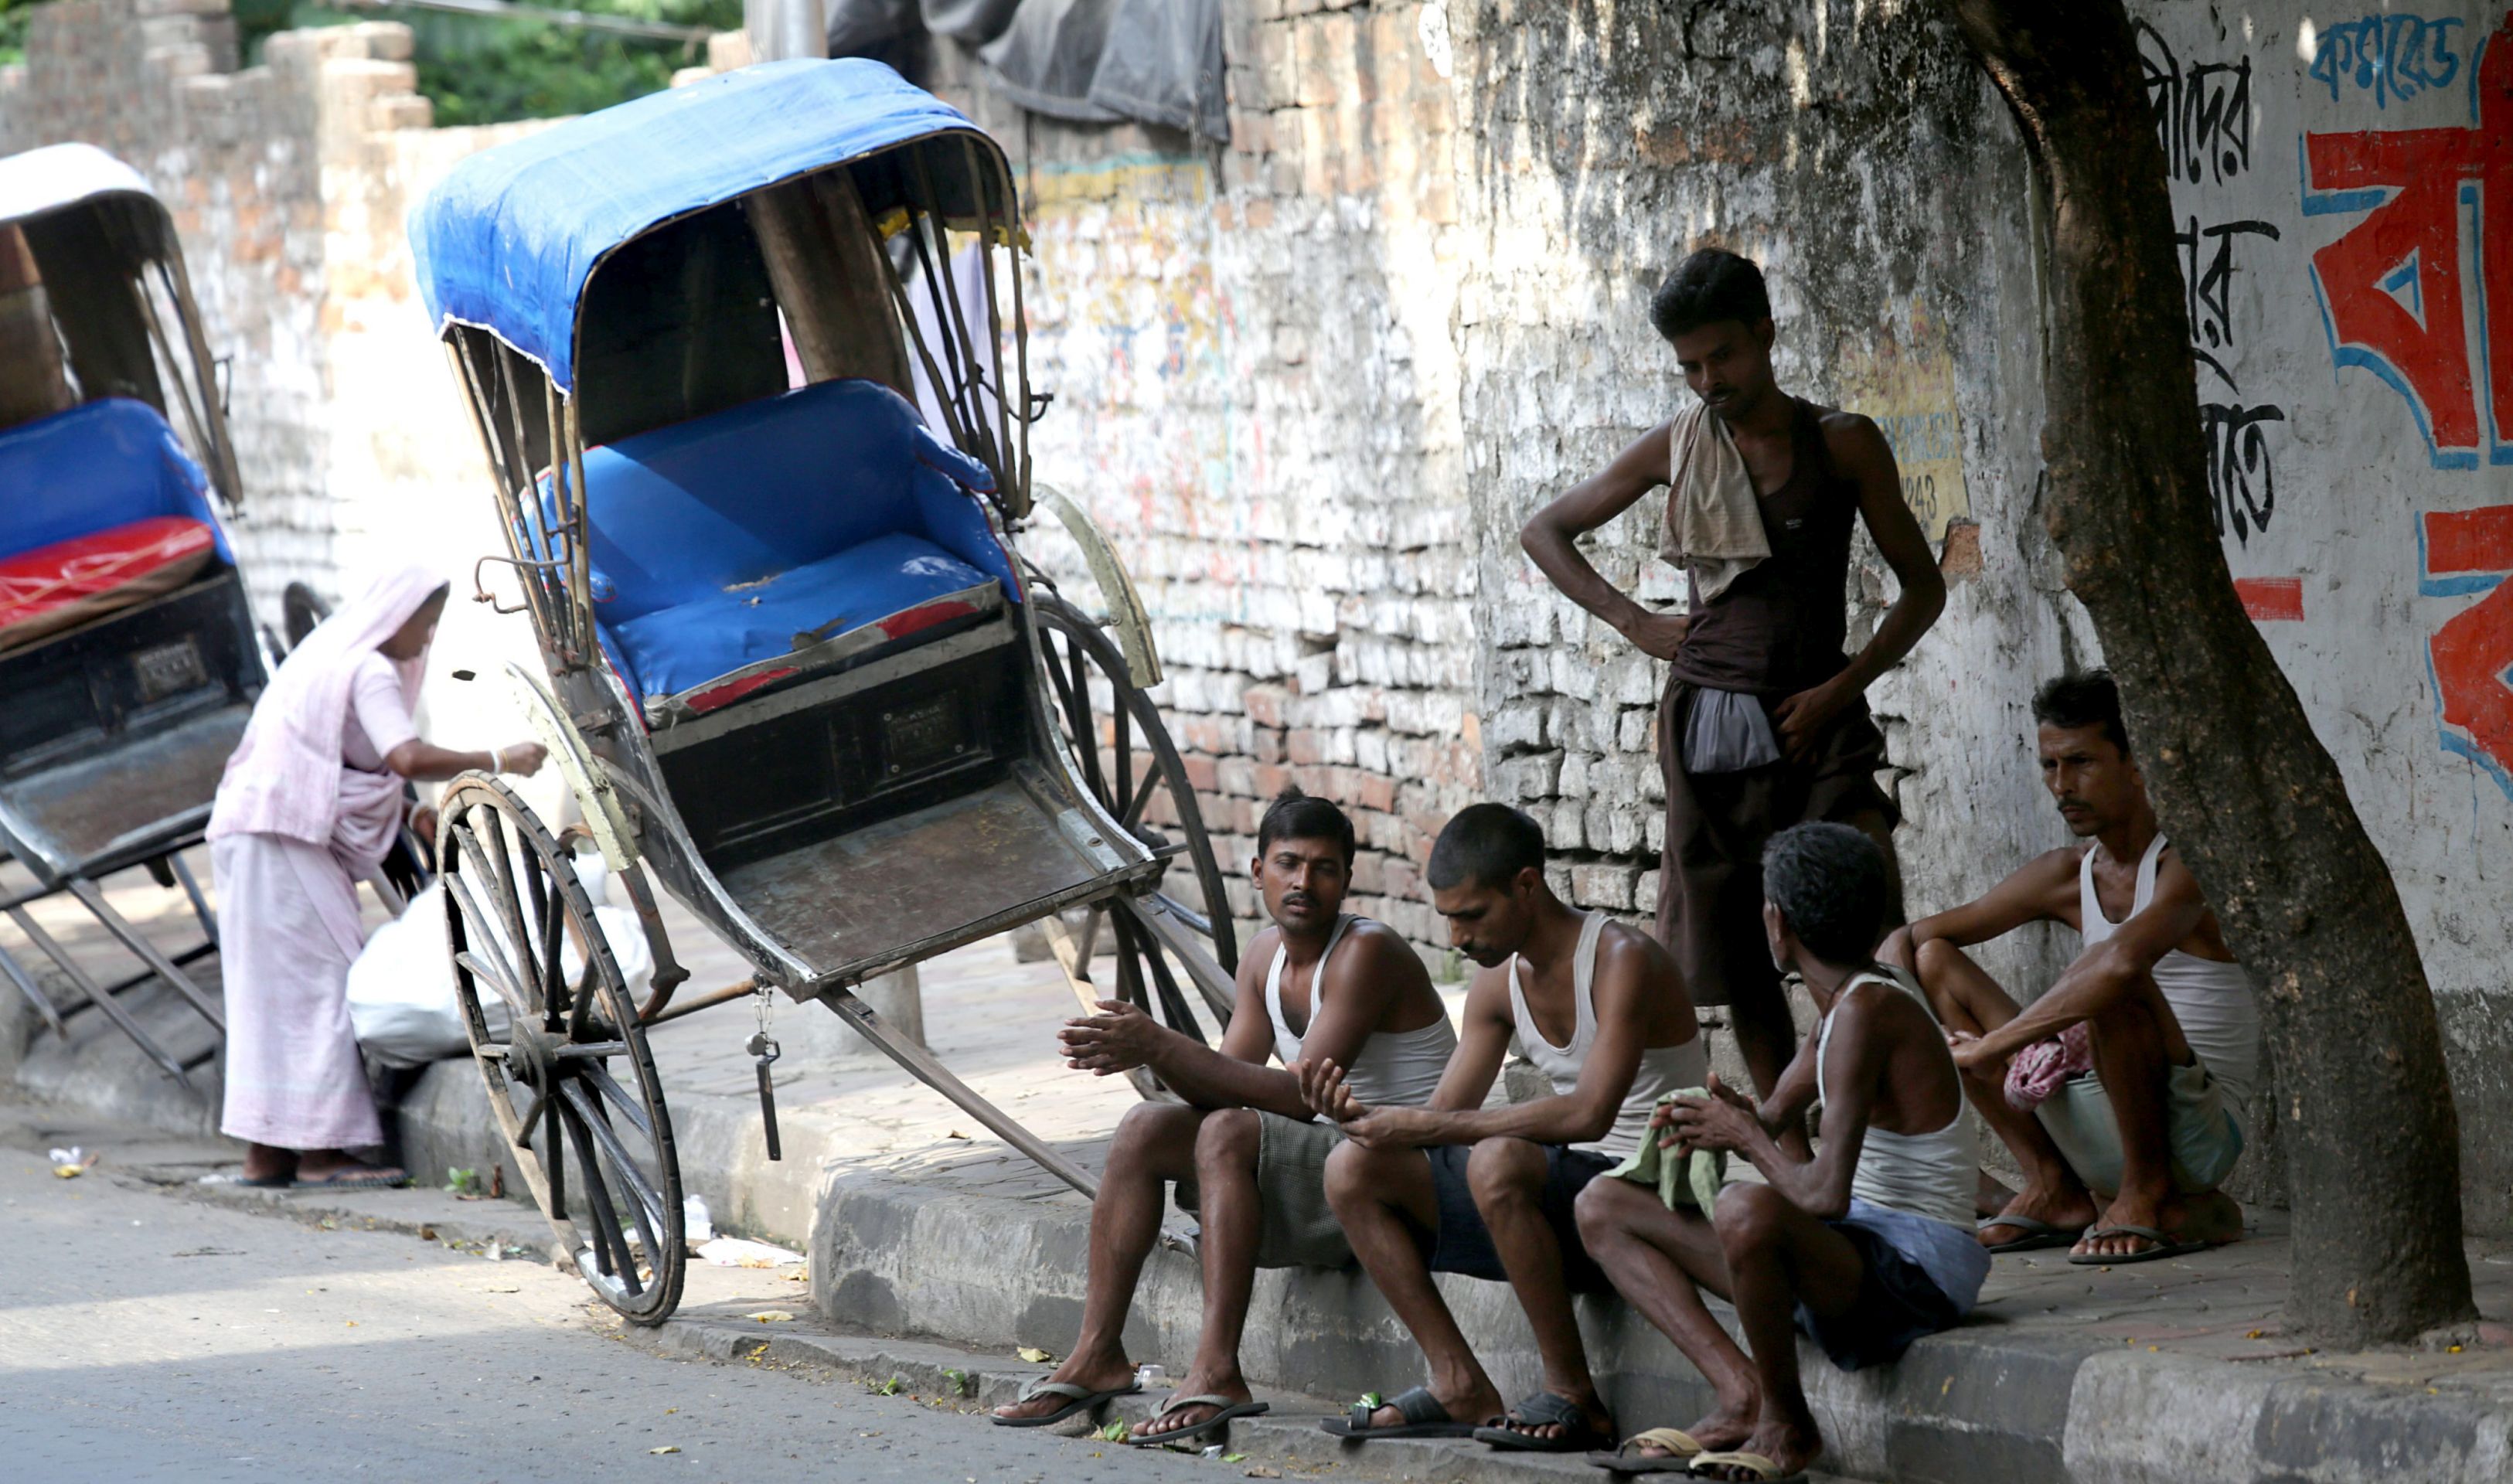 epa04772294 Indian rickshaw pullers take a rest on the street while temperatures reach 41 degrees Celsius in Calcutta, India, 28 May 2015. Large parts of India, particularly its south, are reeling under oppressive heat conditions that have killed hundreds of people. The current heatwave has been particularly deadly not only due to its high temperatures, but also due to its length.  EPA/PIYAL ADHIKARY